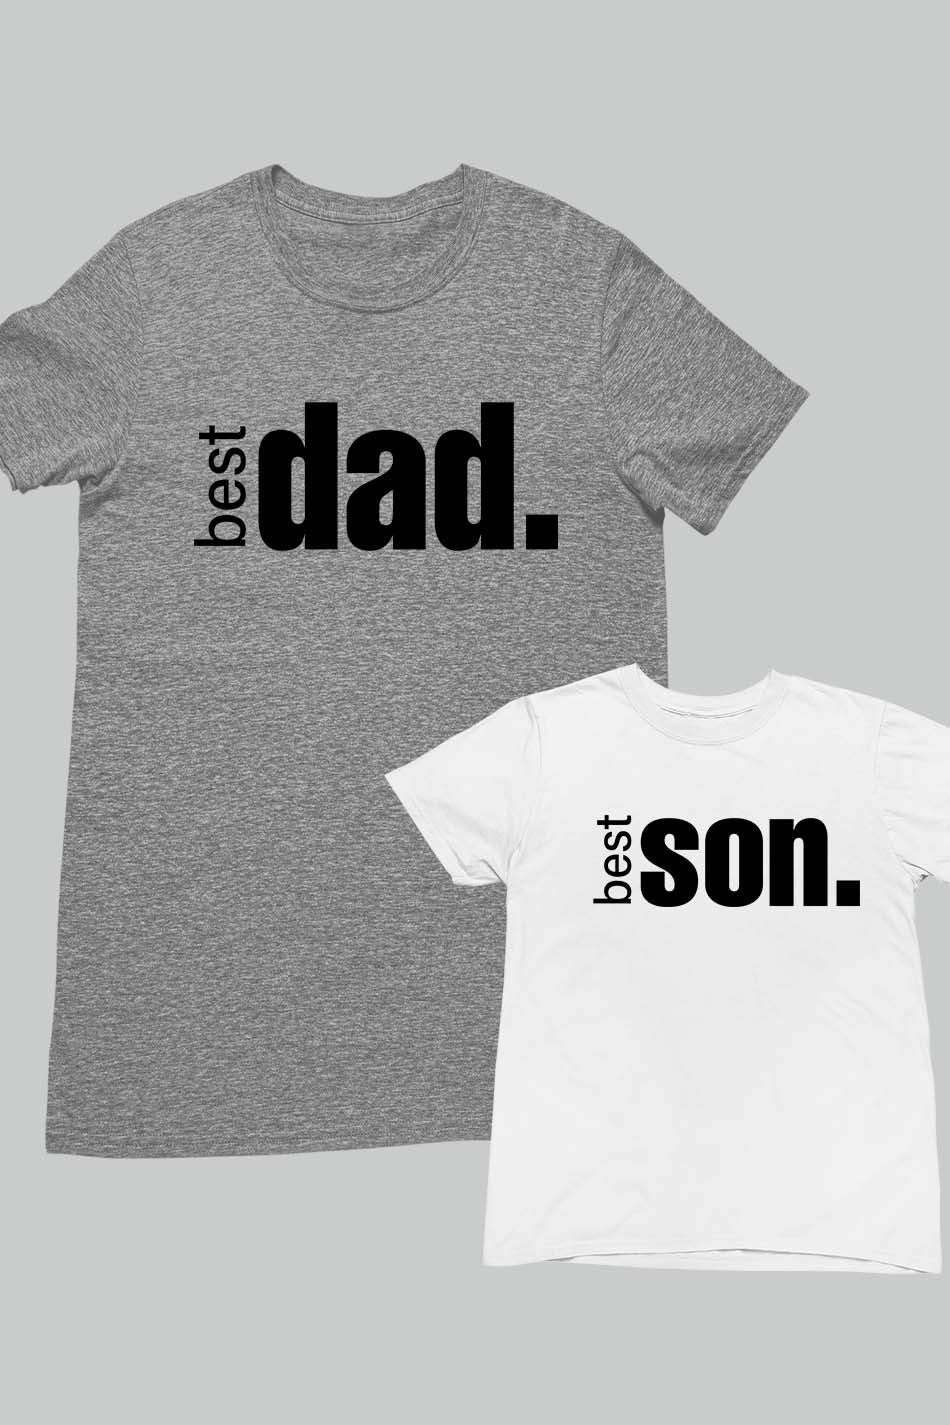 Matching Daddy Son T Shirt Father and sons matching Shirts